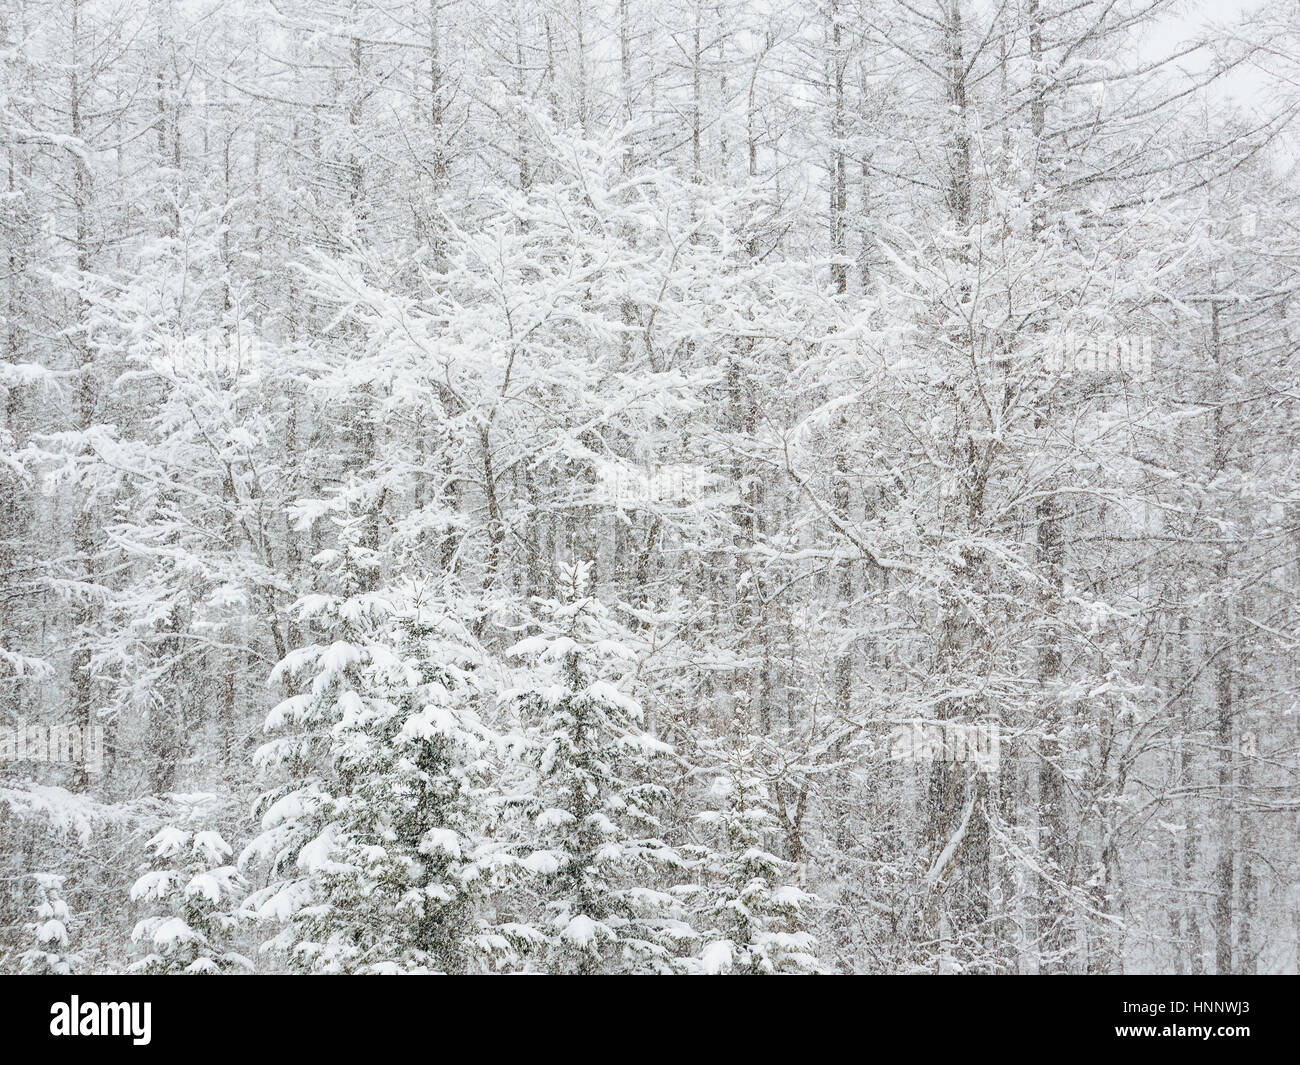 Forest in snowy day Stock Photo